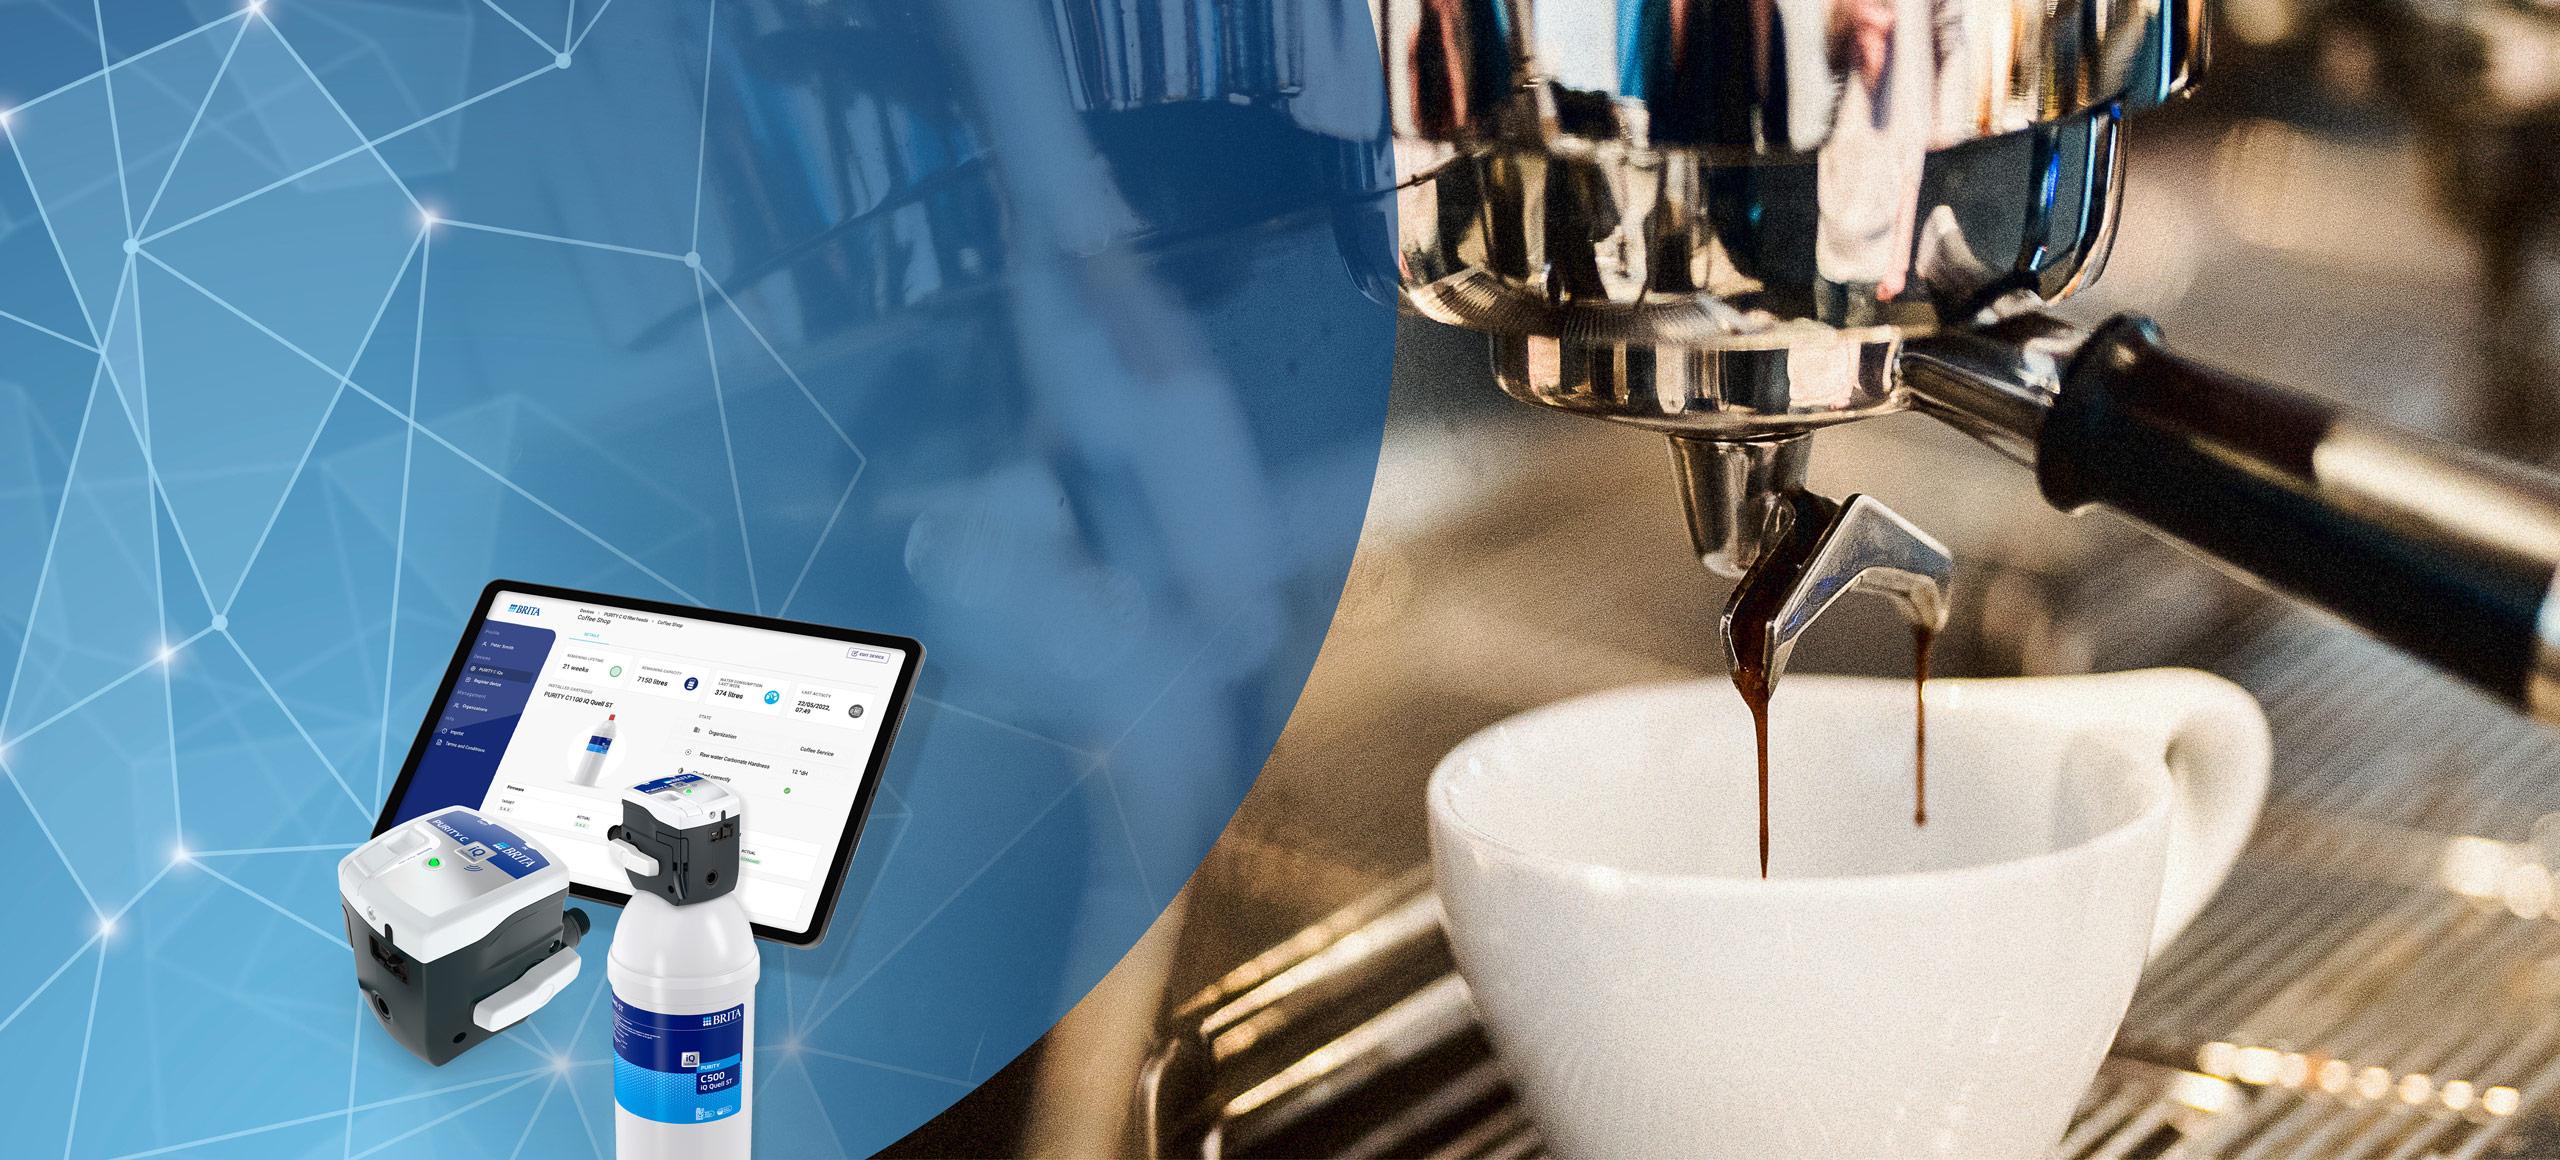 Coffee being poured in a coffee cup and BRITA PURITY C iQ system.